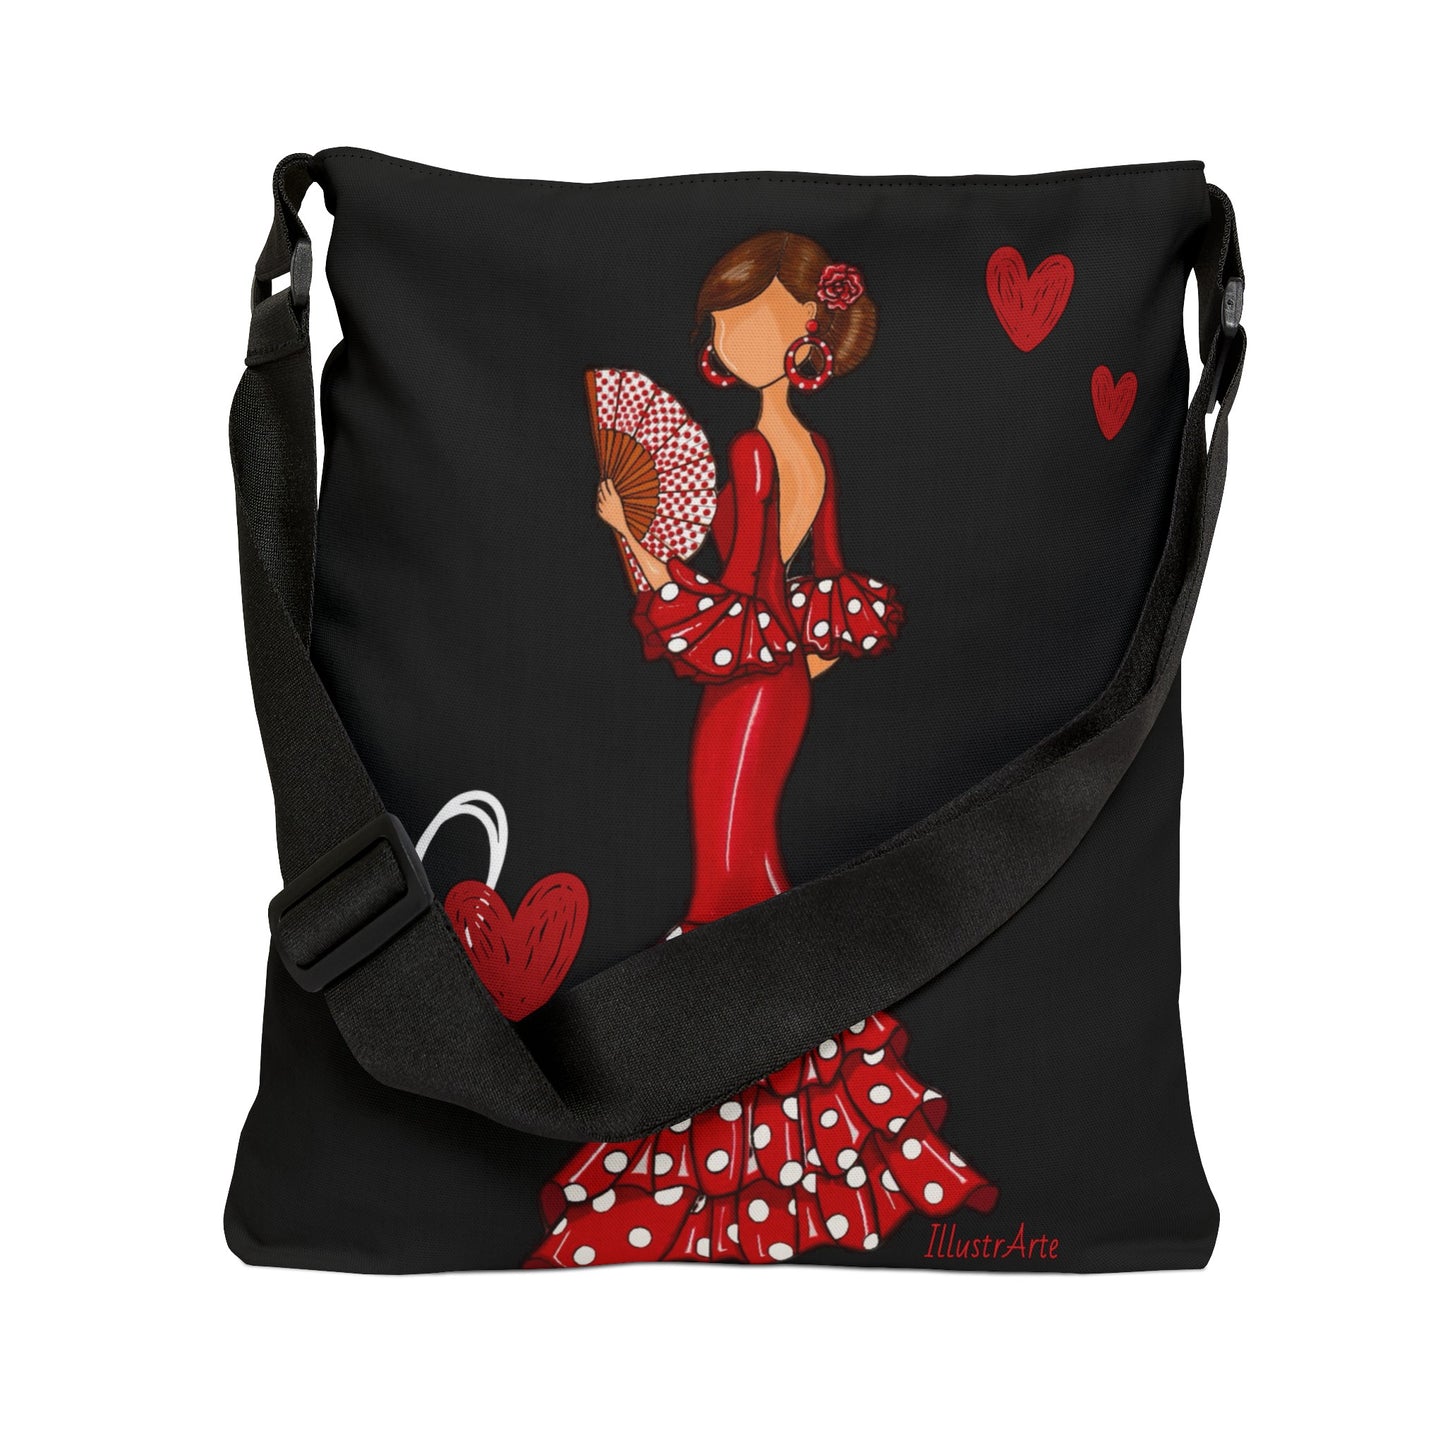 a black bag with a woman holding a heart